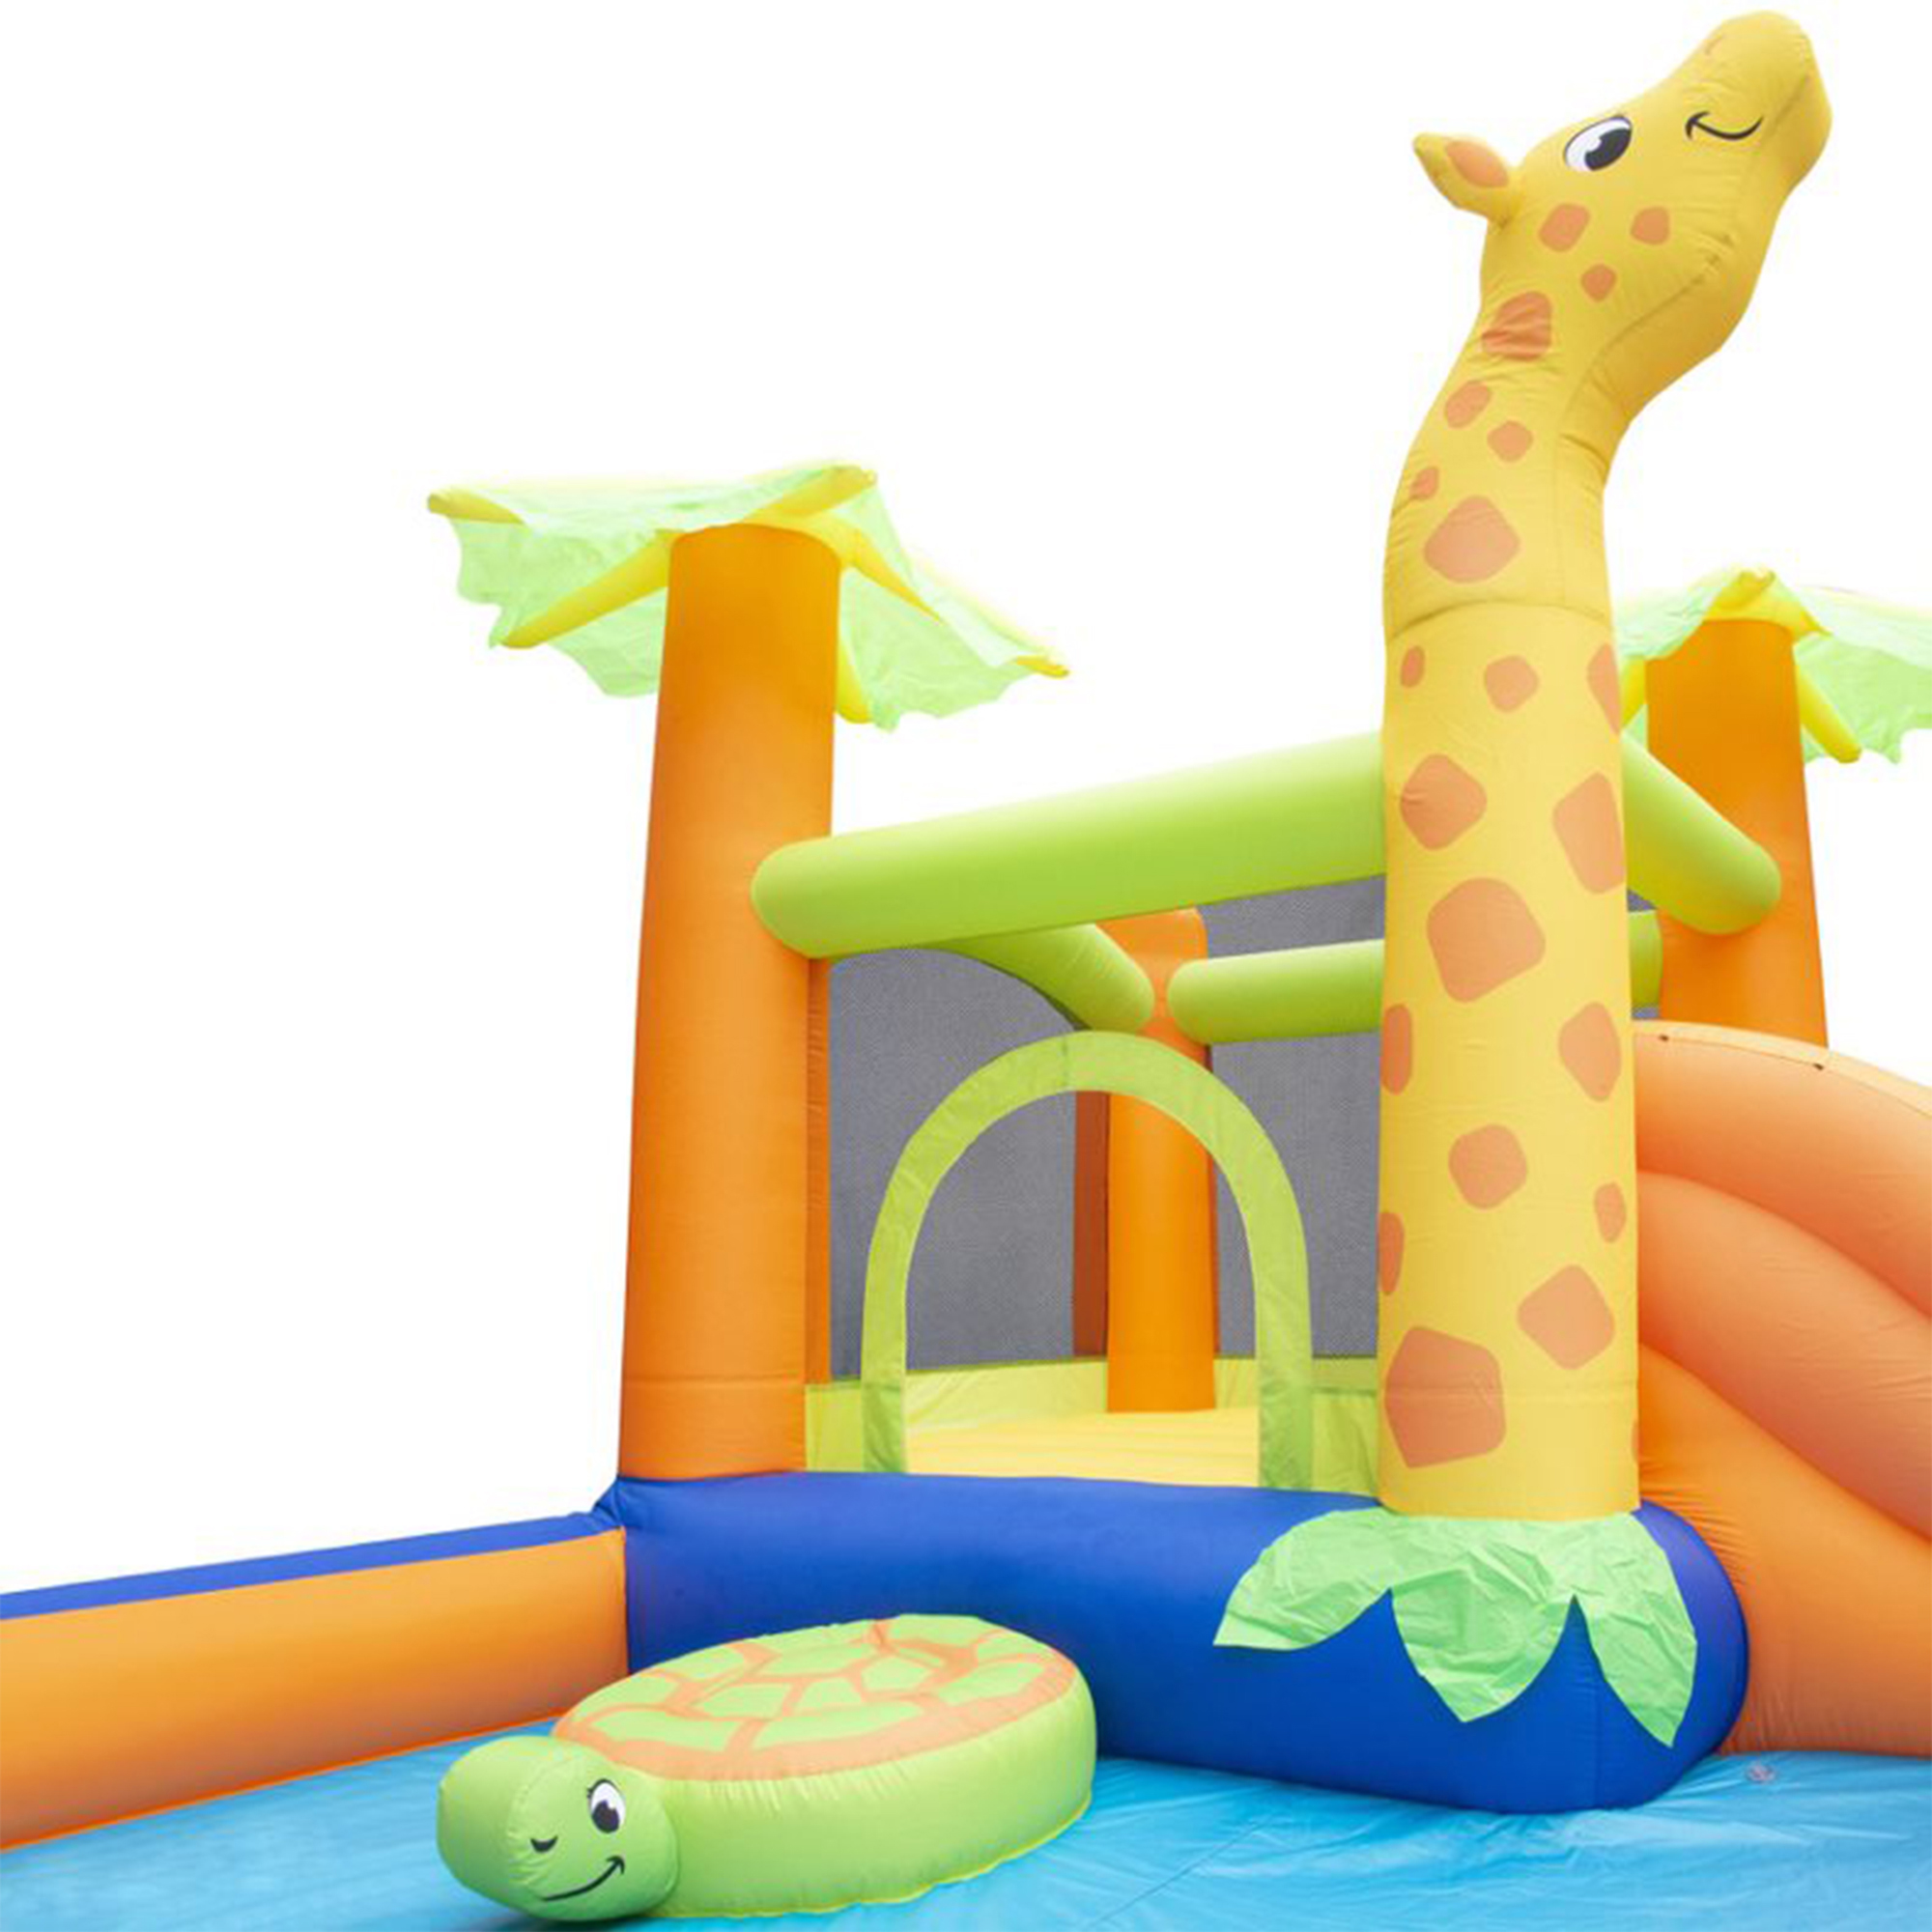 Banzai Safari Splash Water Park Inflatable Bouncer with Cannon and Blower - image 10 of 12